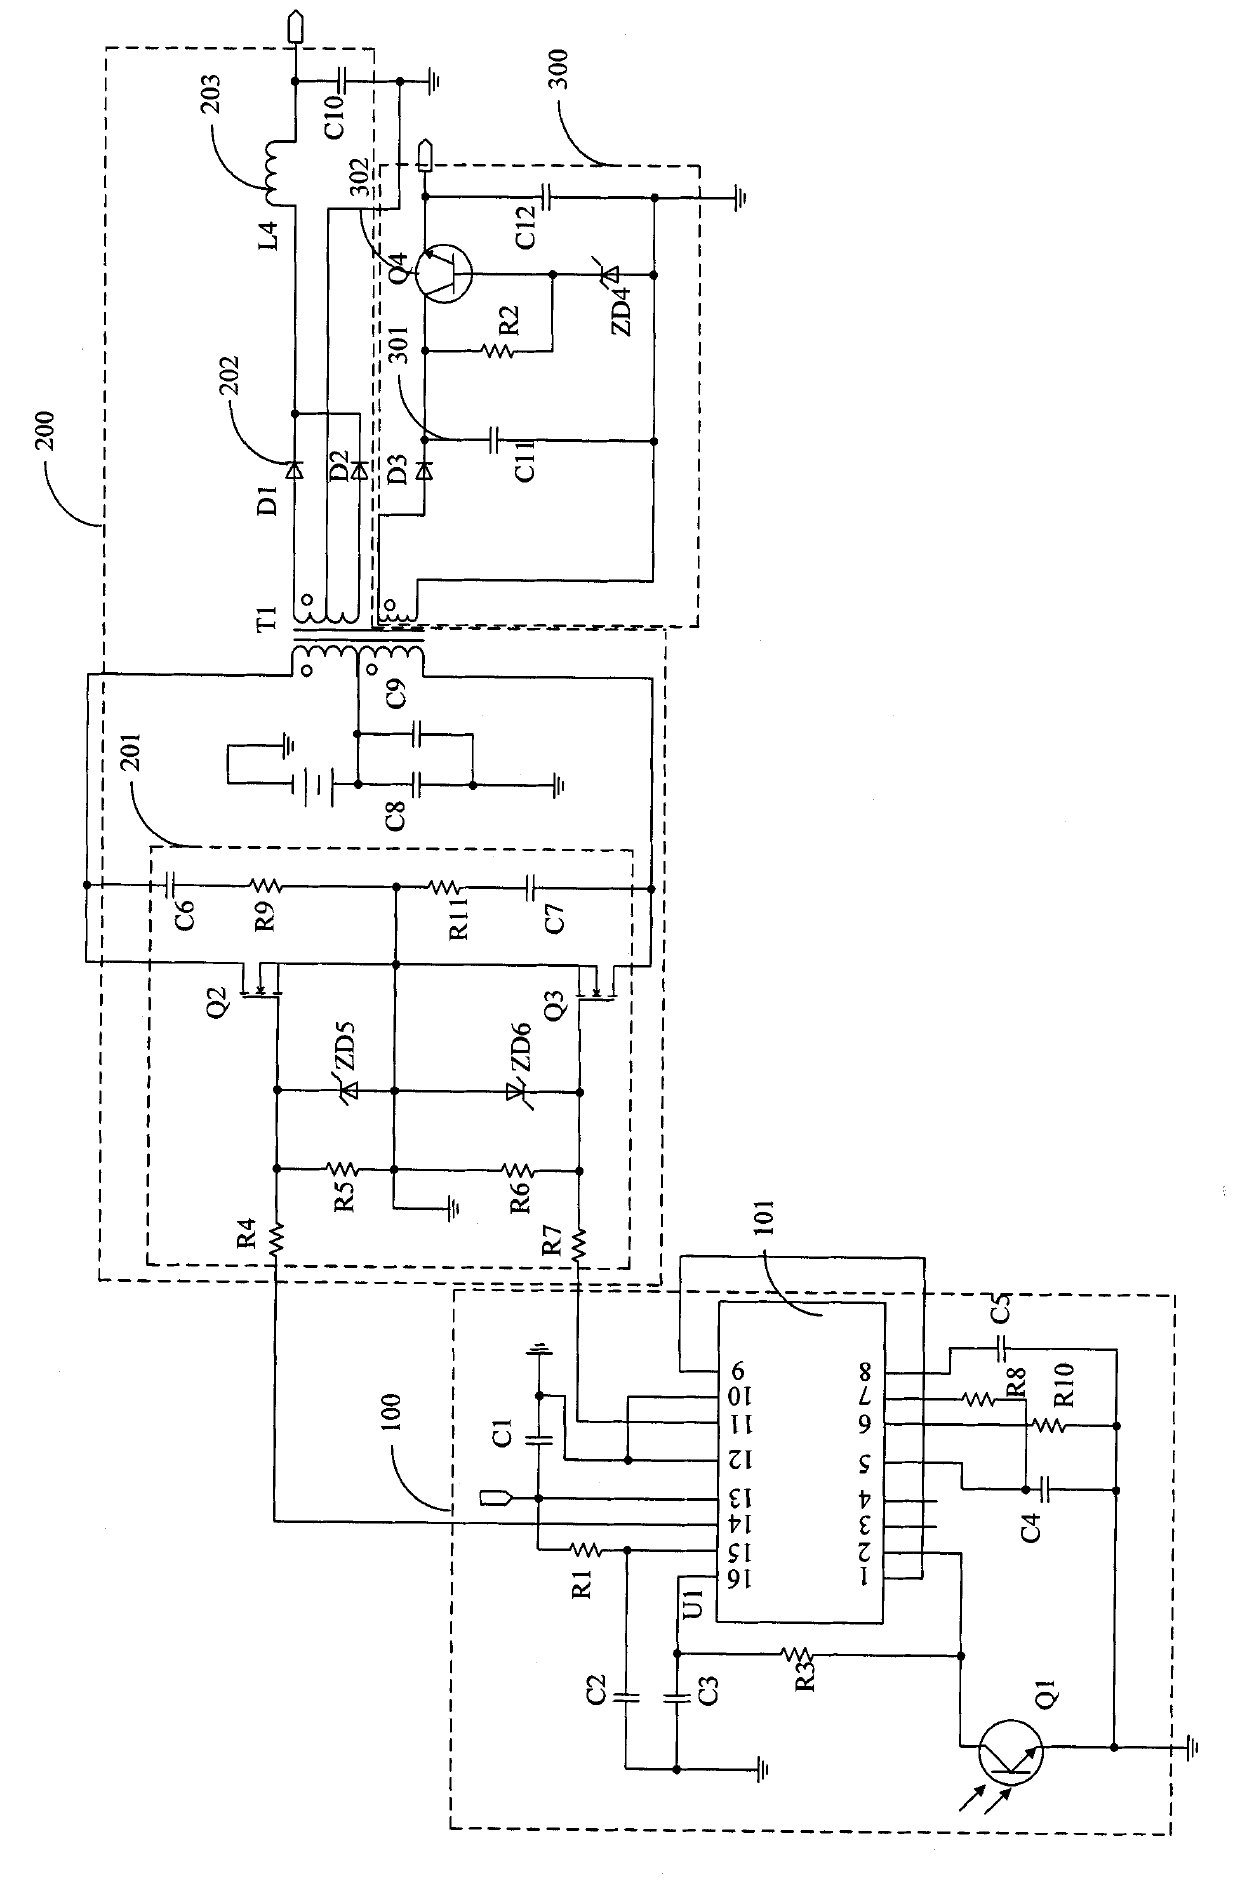 Battery booster circuit, lamp control circuit and emergency lamp